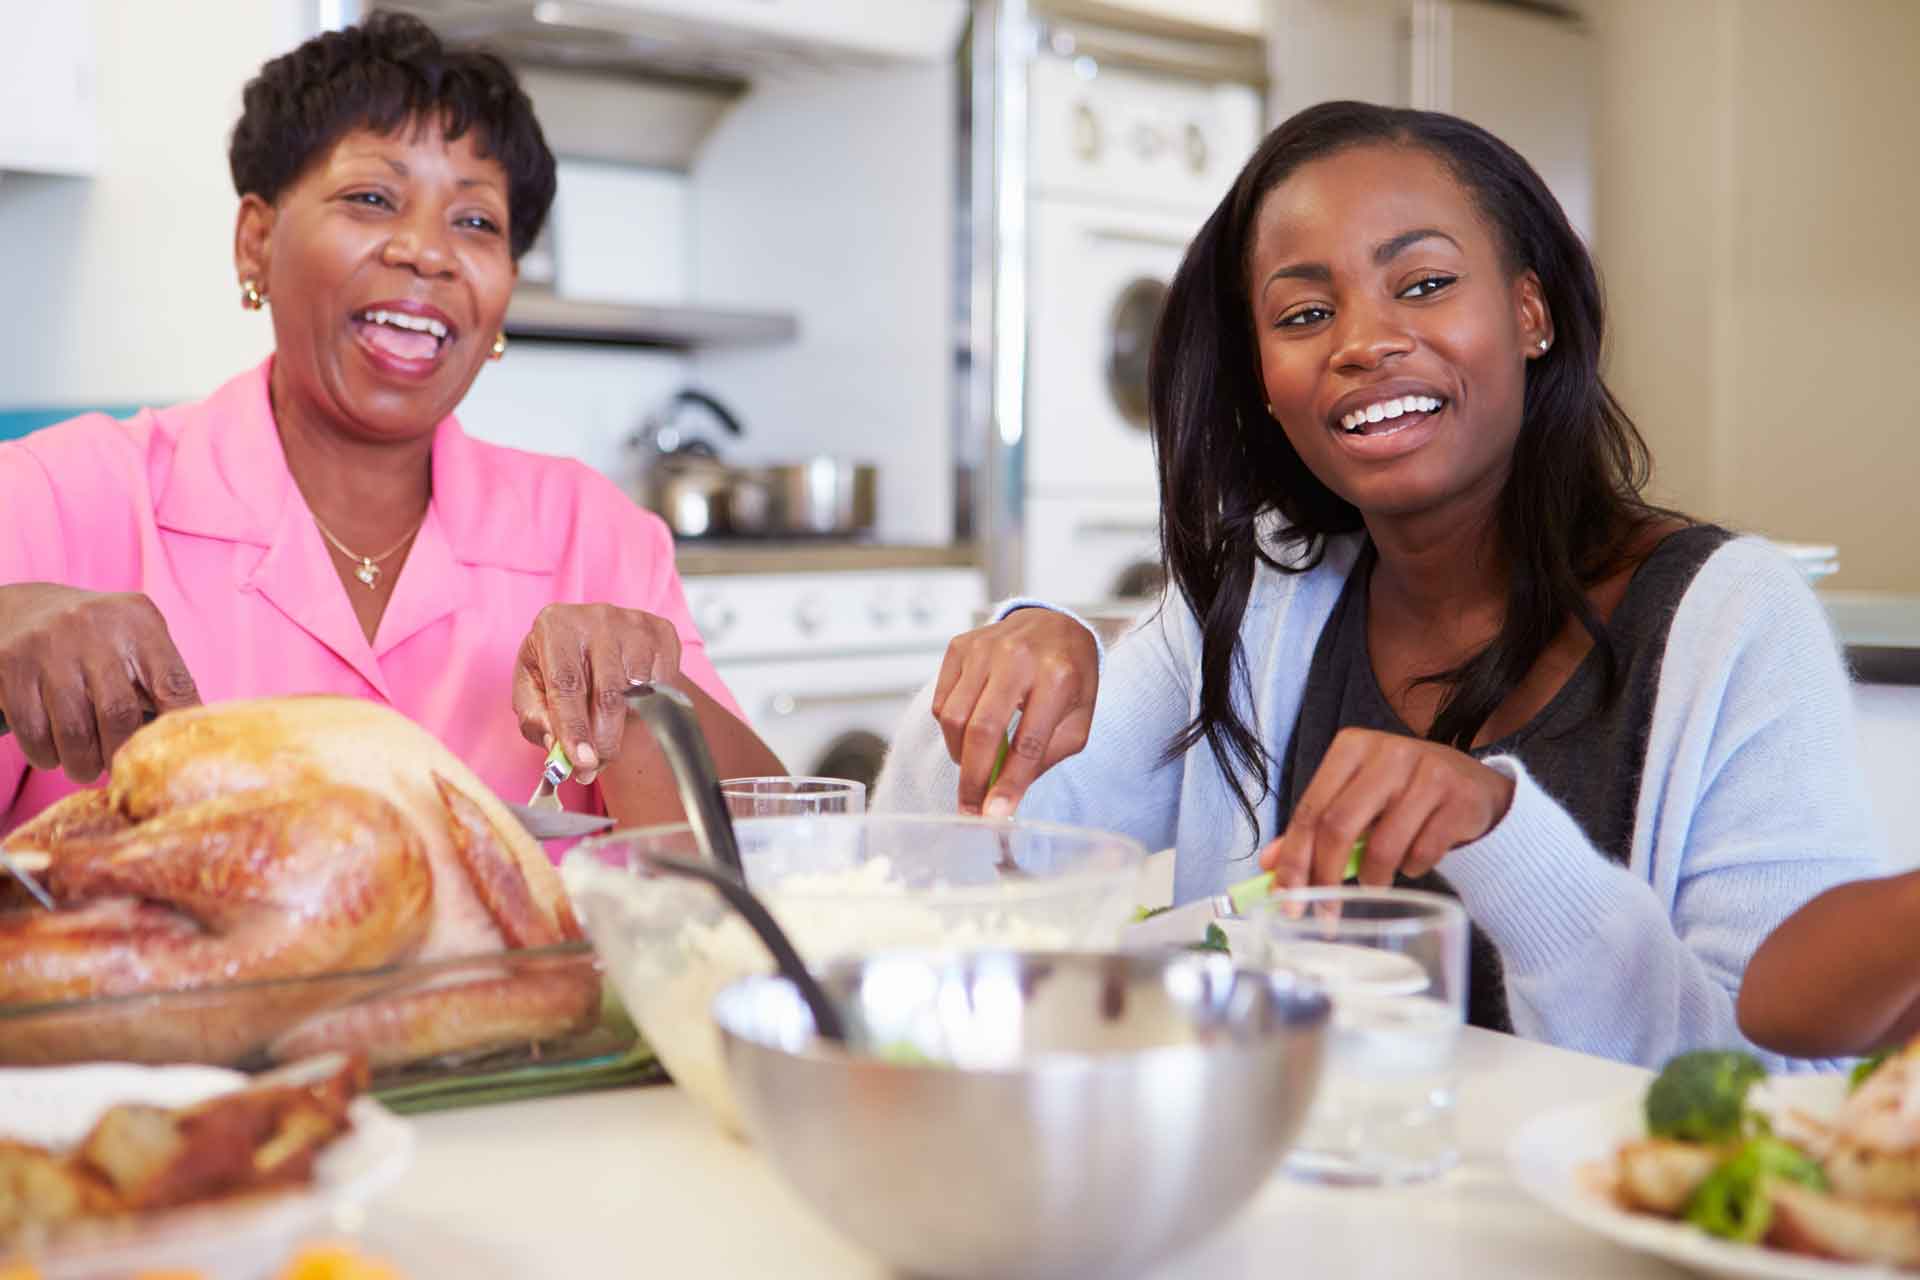 Medical Questions Relatives Have Asked During Family Holiday Meals